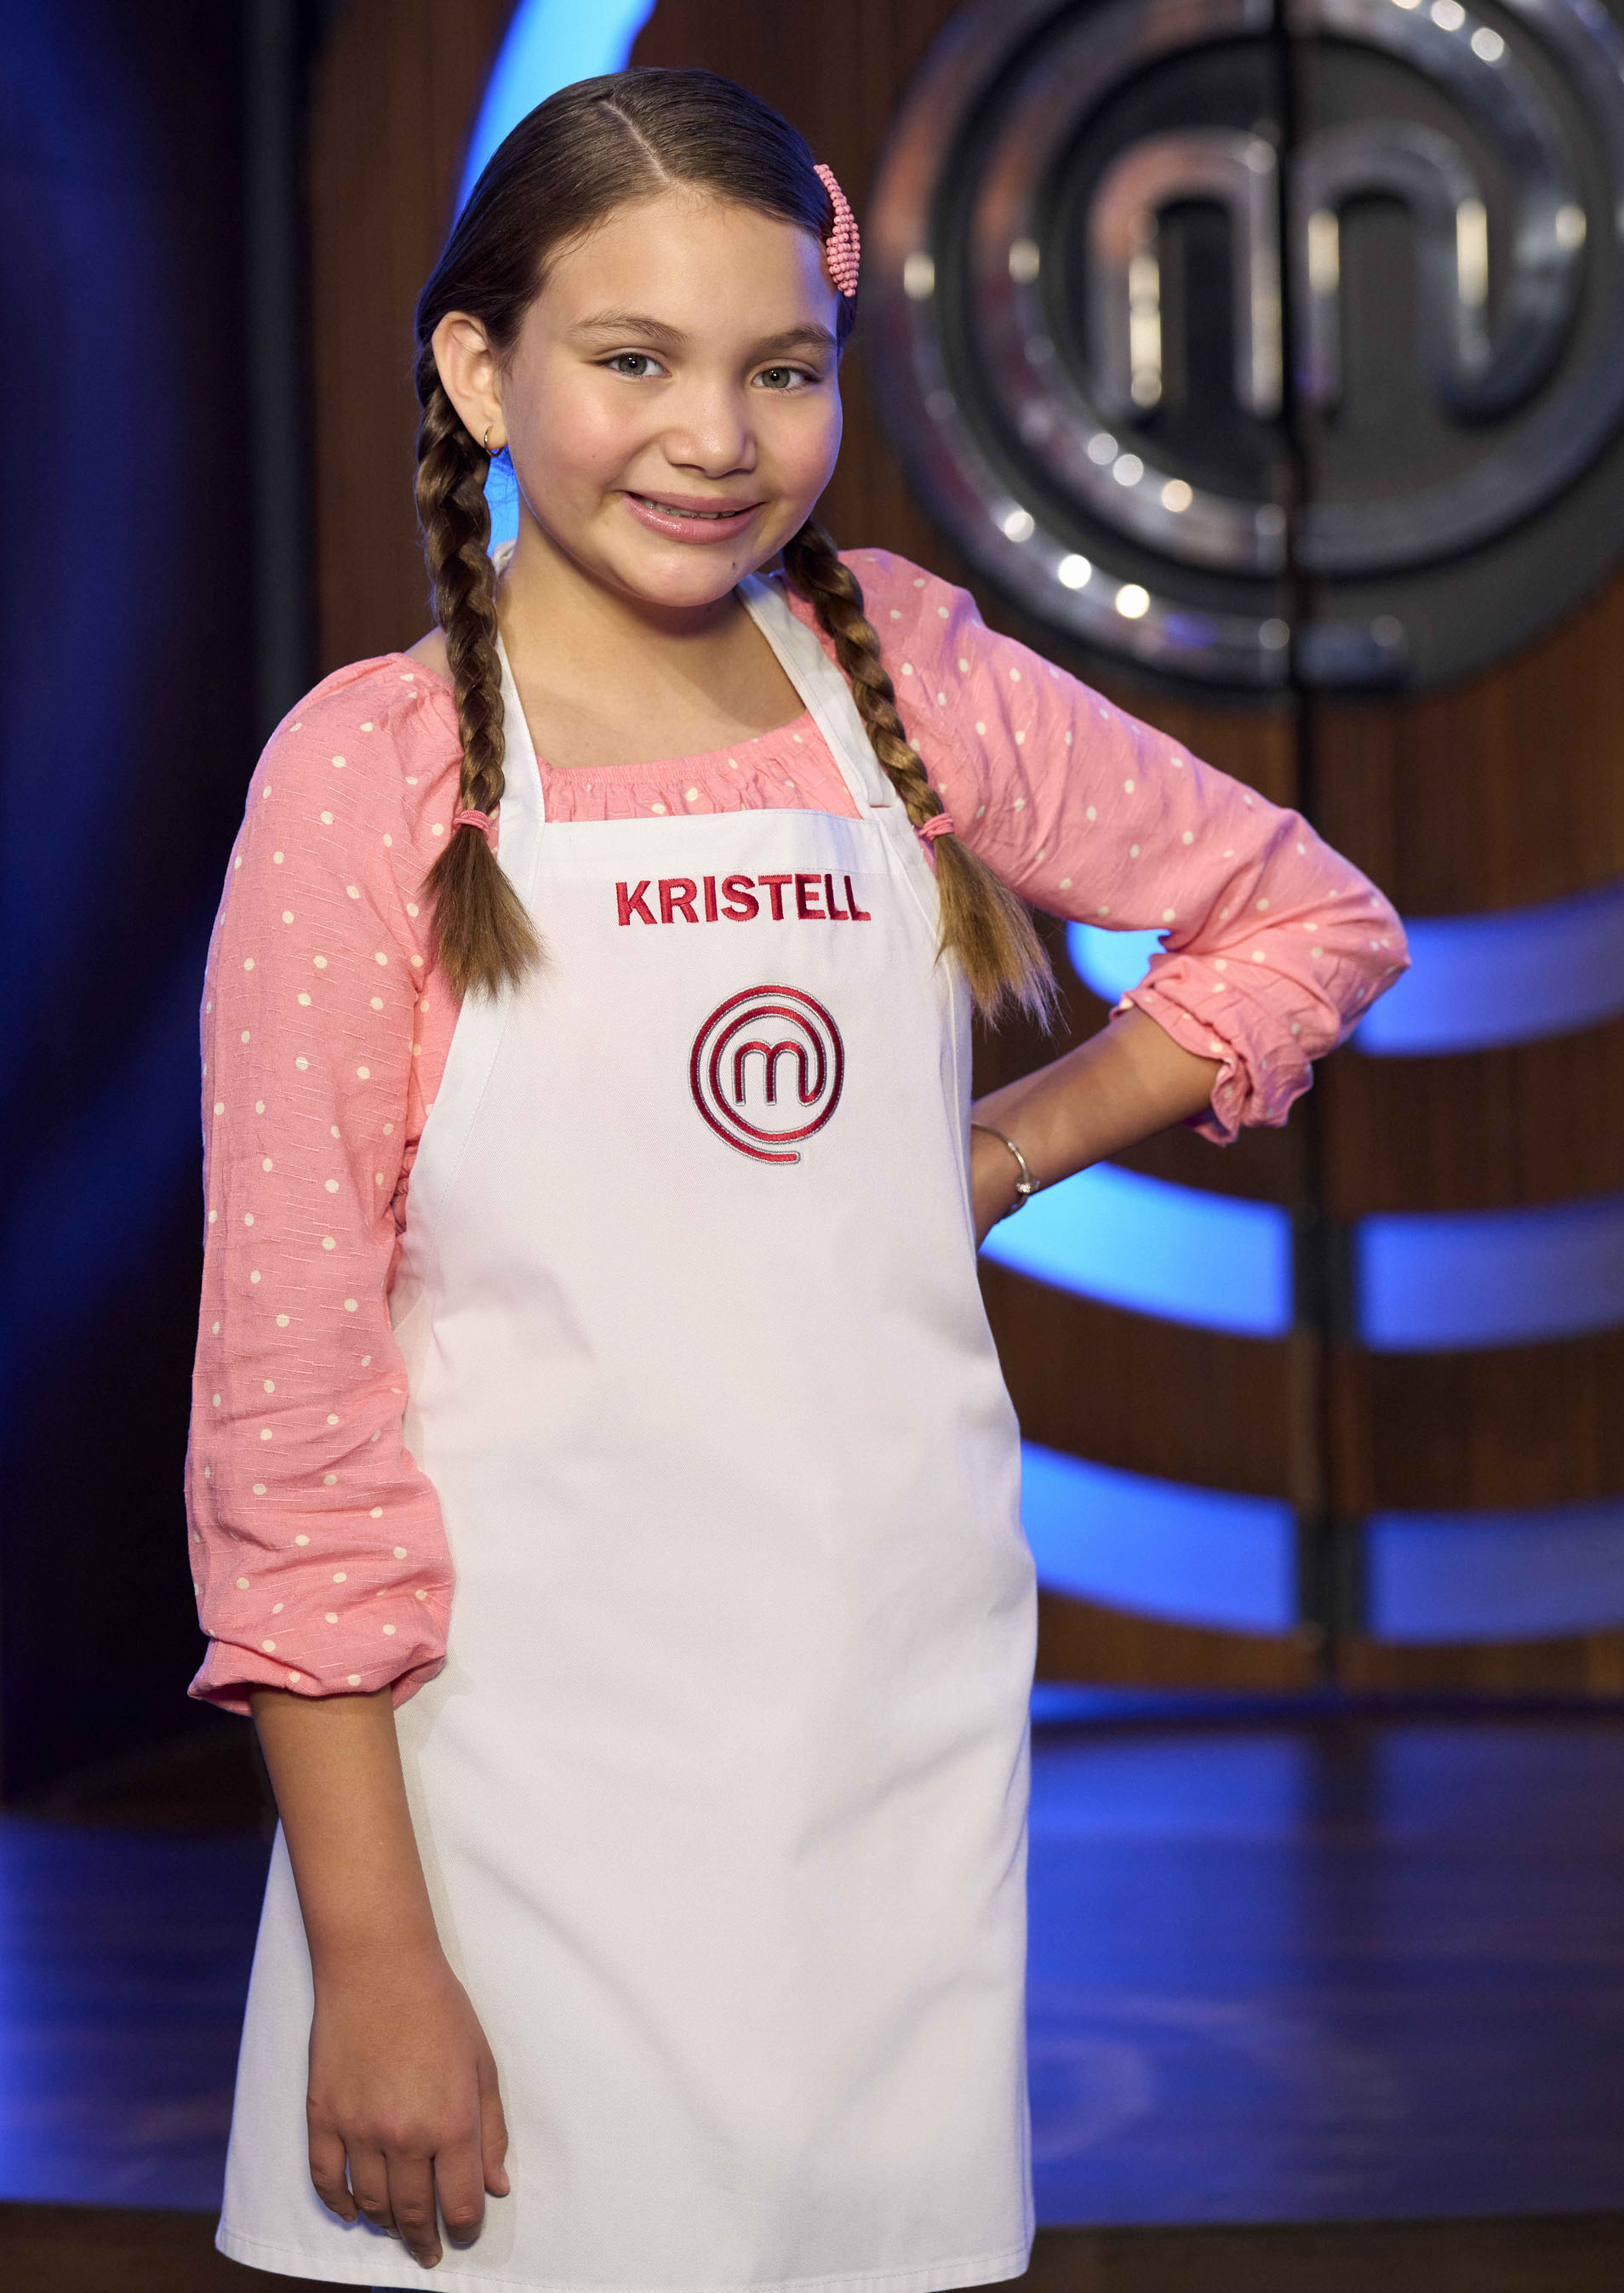 A young girl wearing an apron that says “Kristell.”